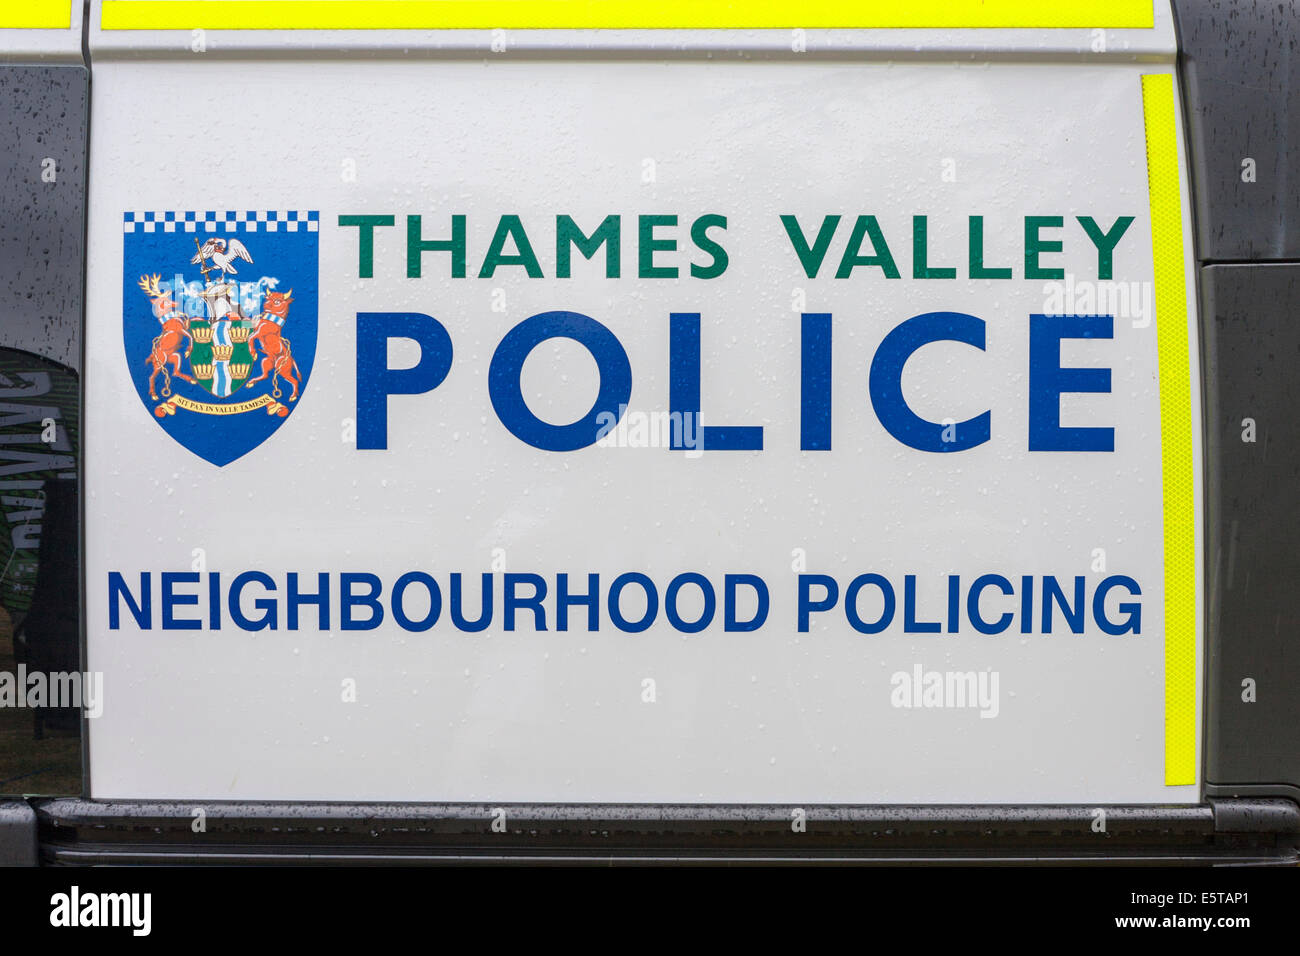 Thames Valley Police sign on side of van Stock Photo